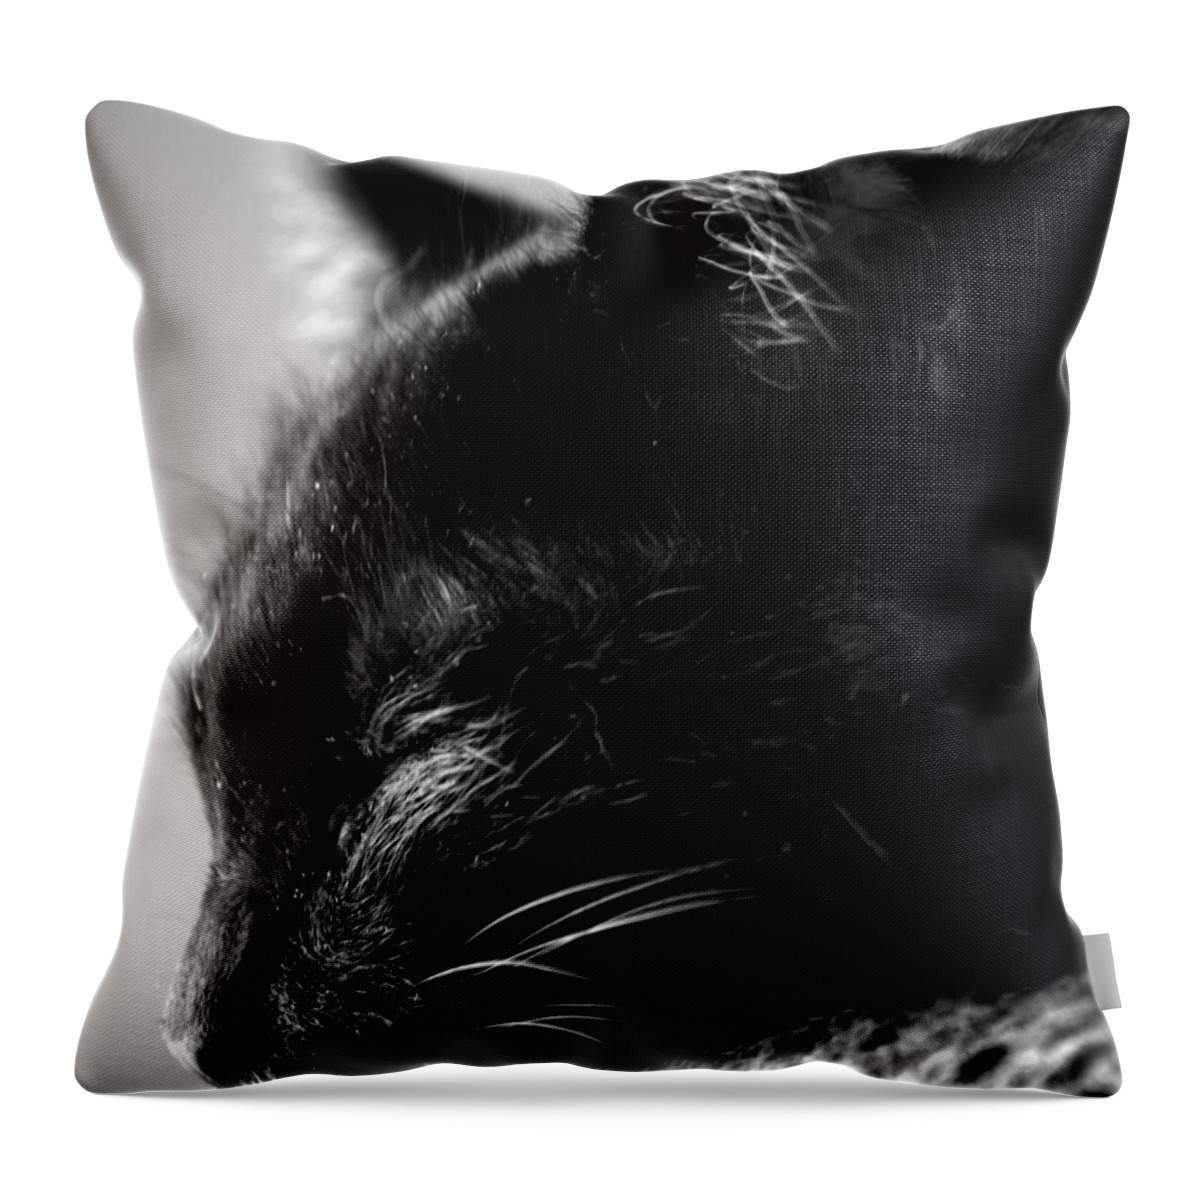 Black Cat Throw Pillow featuring the photograph Snooze by Camille Lopez